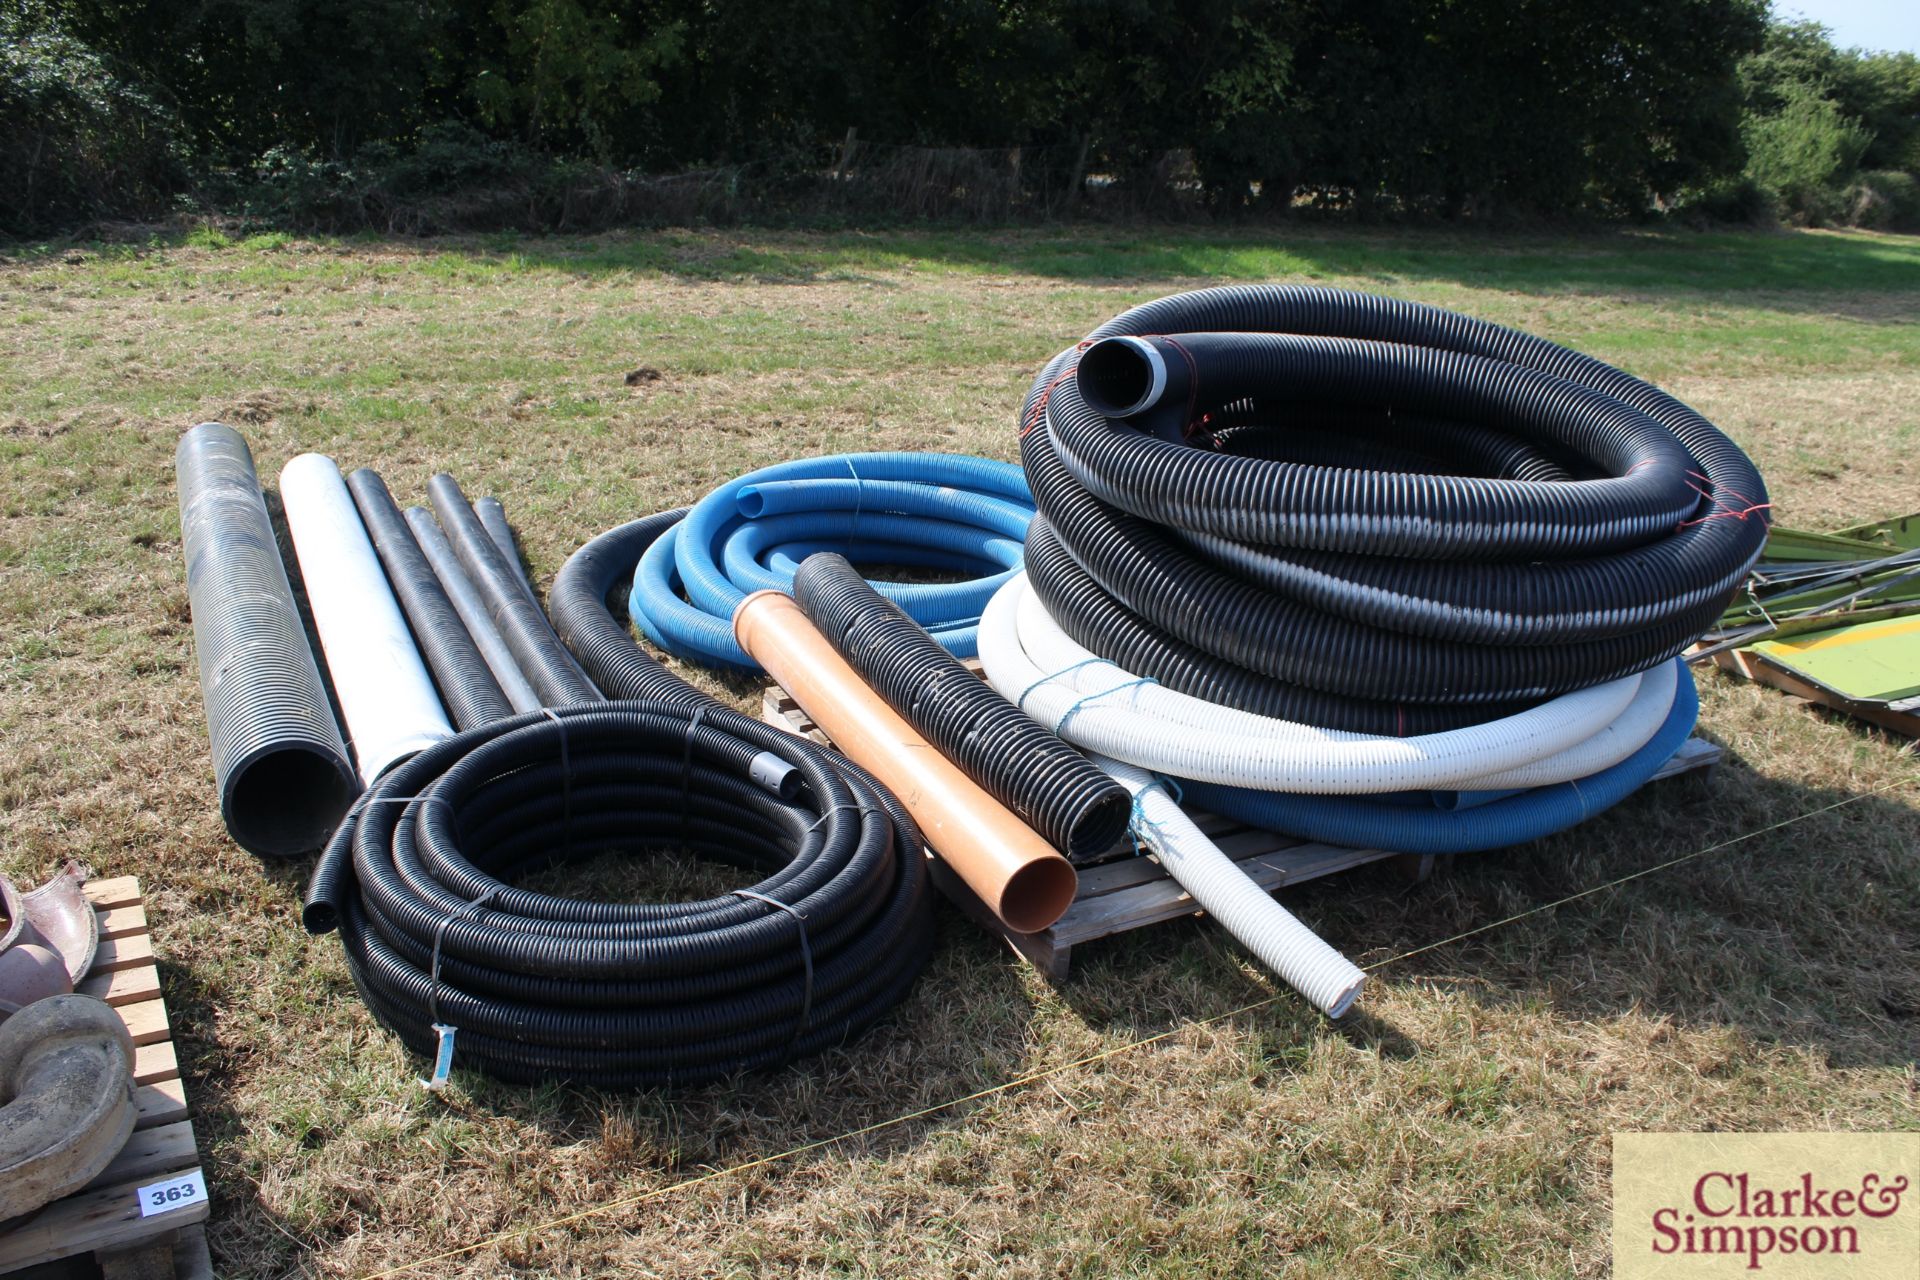 Large quantity of drainage pipe.